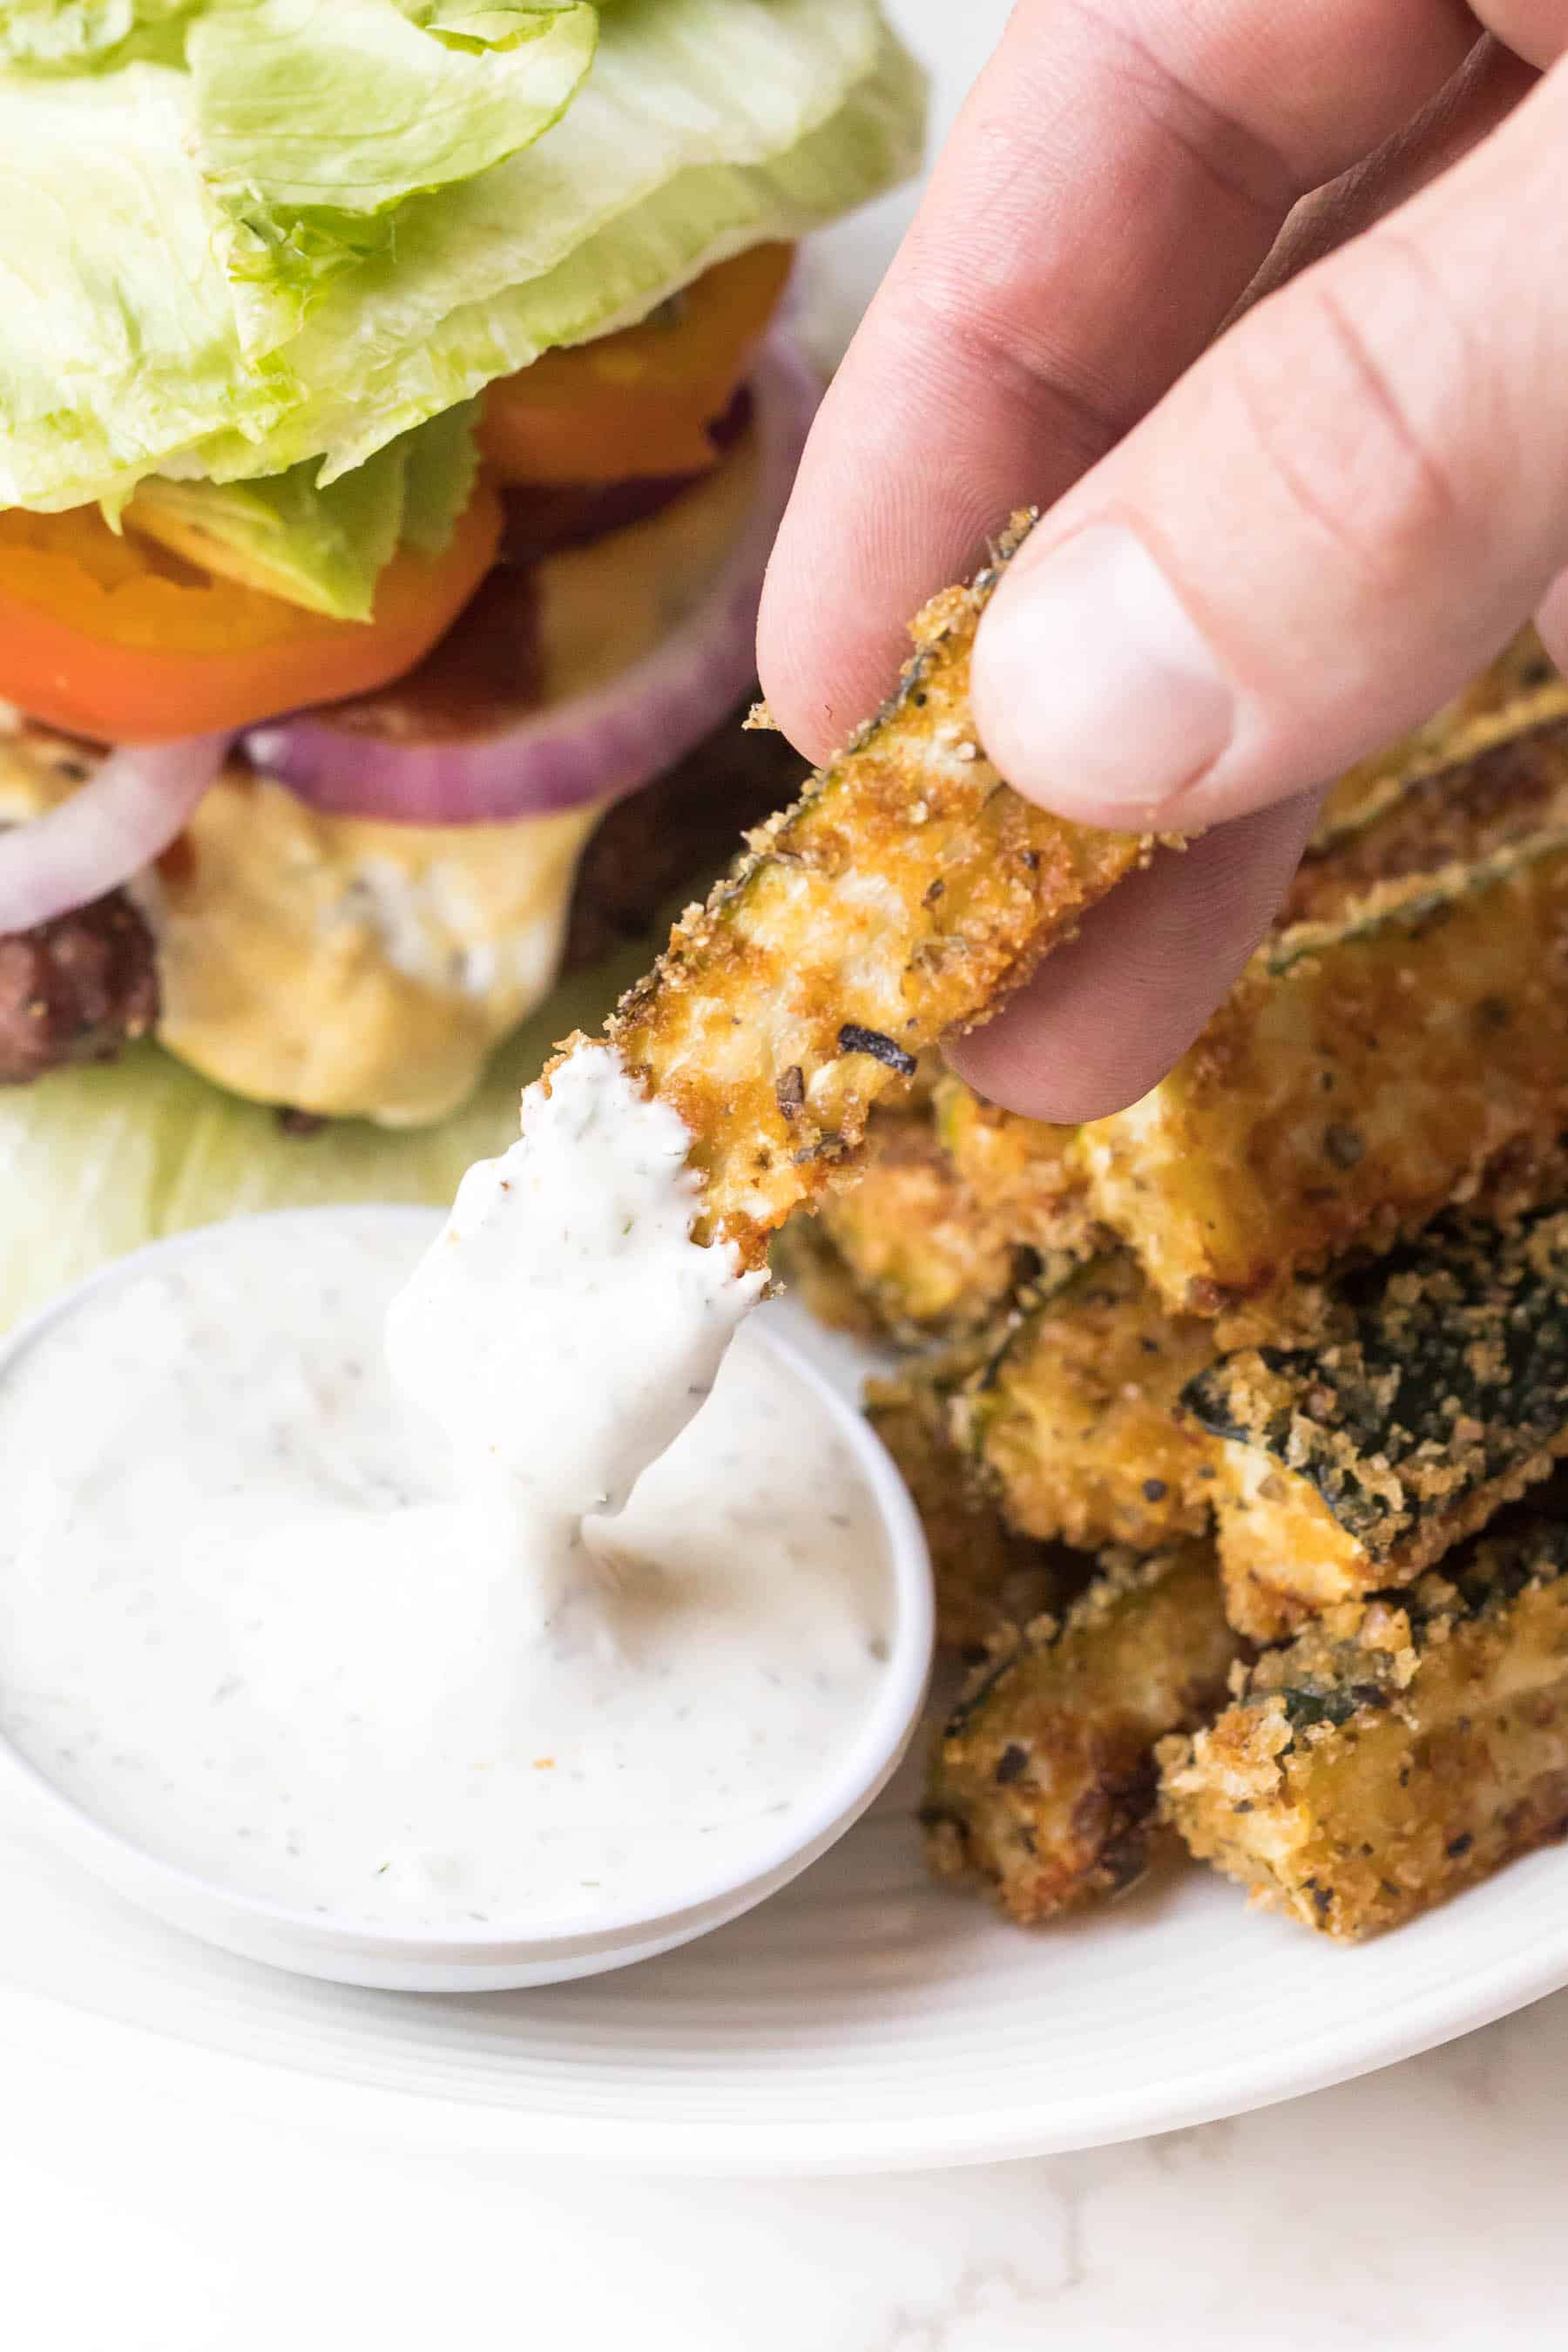 Hand dipping keto zucchini fries in ranch dressing on a white plate and white background with a lettuce wrapped burger on the plate